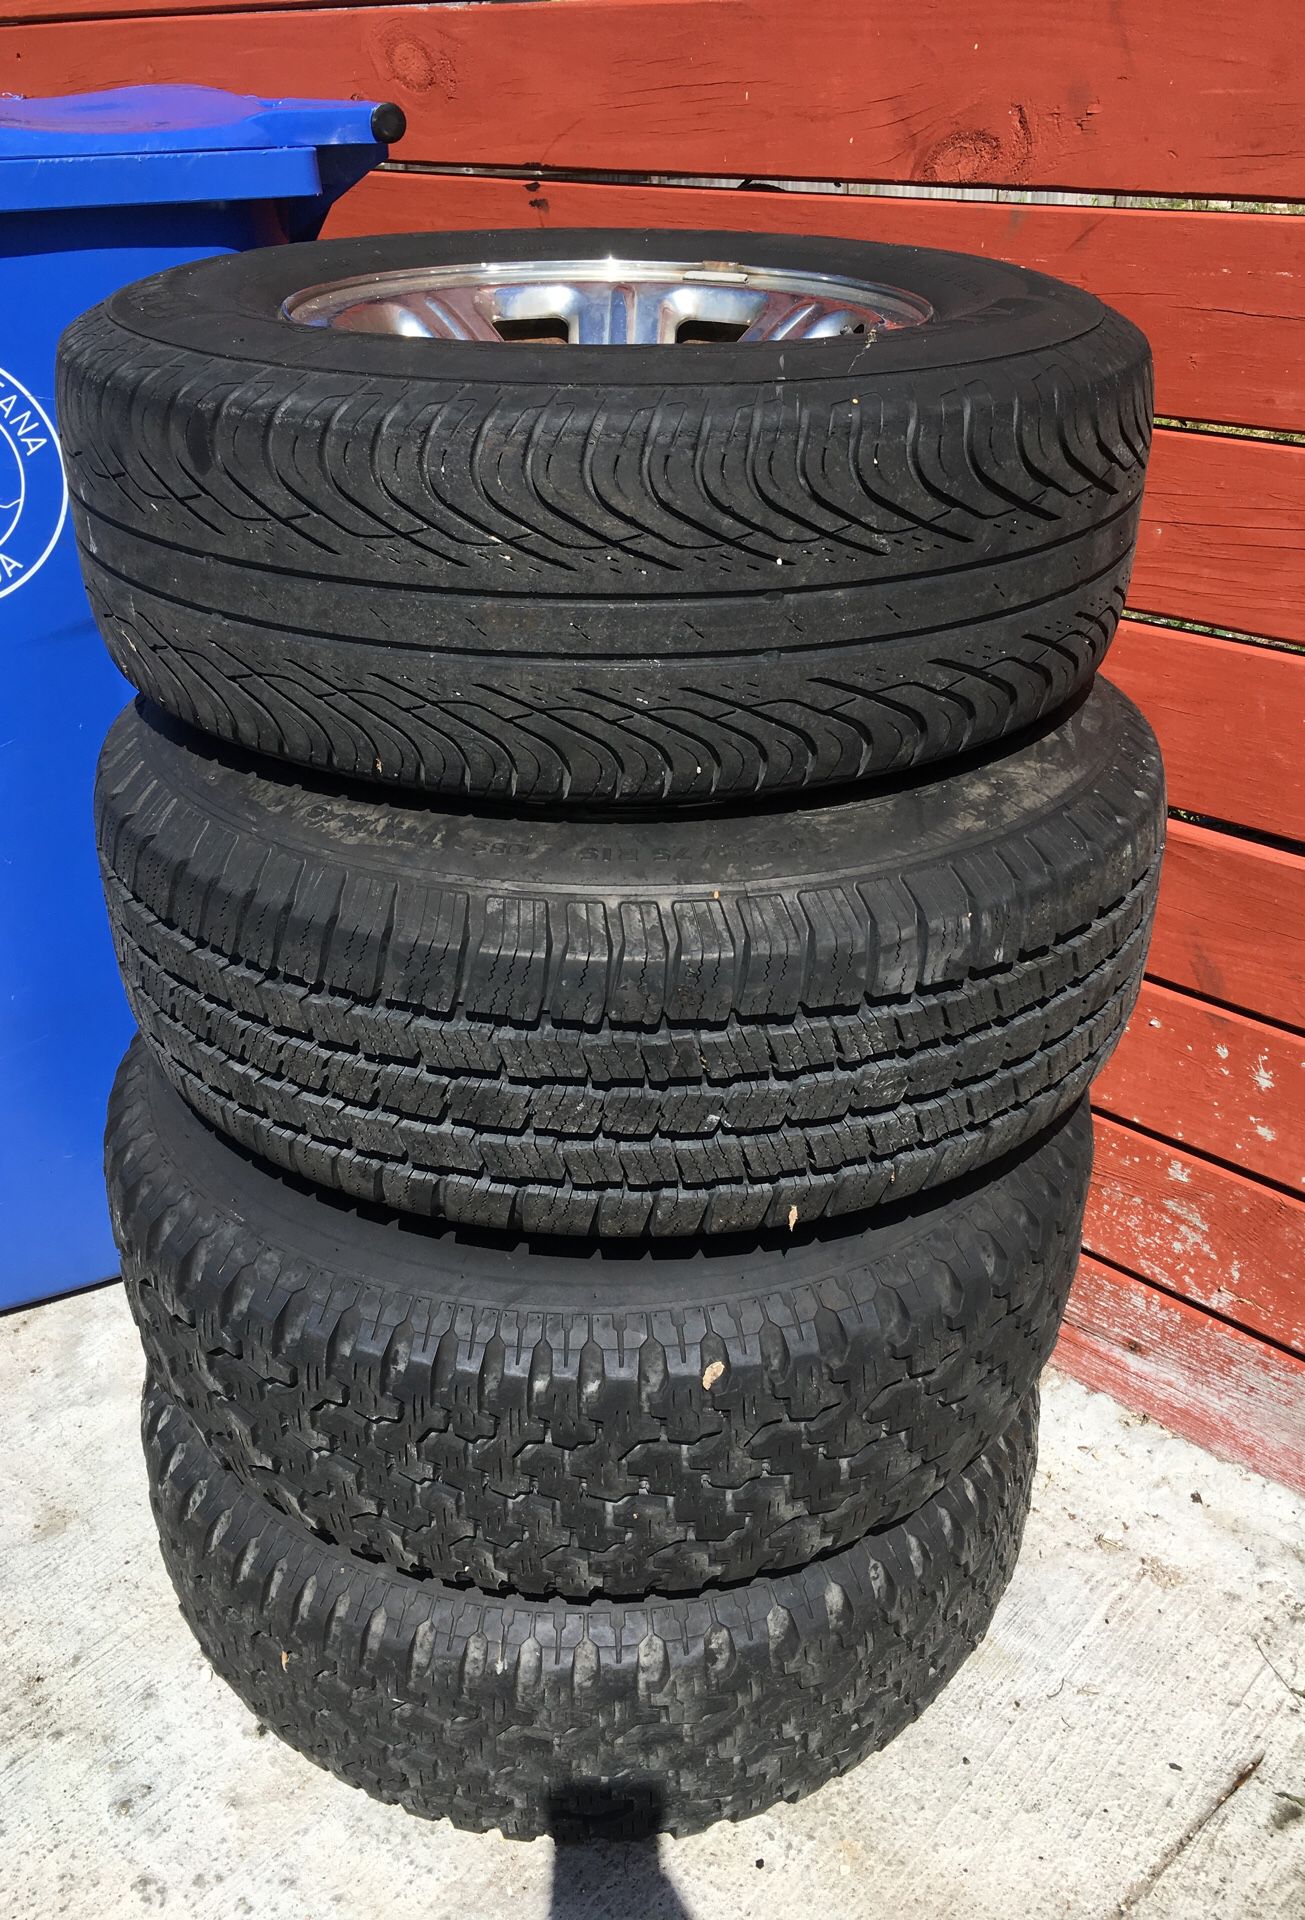 2002 ford ranger tires and rims 235/70r15